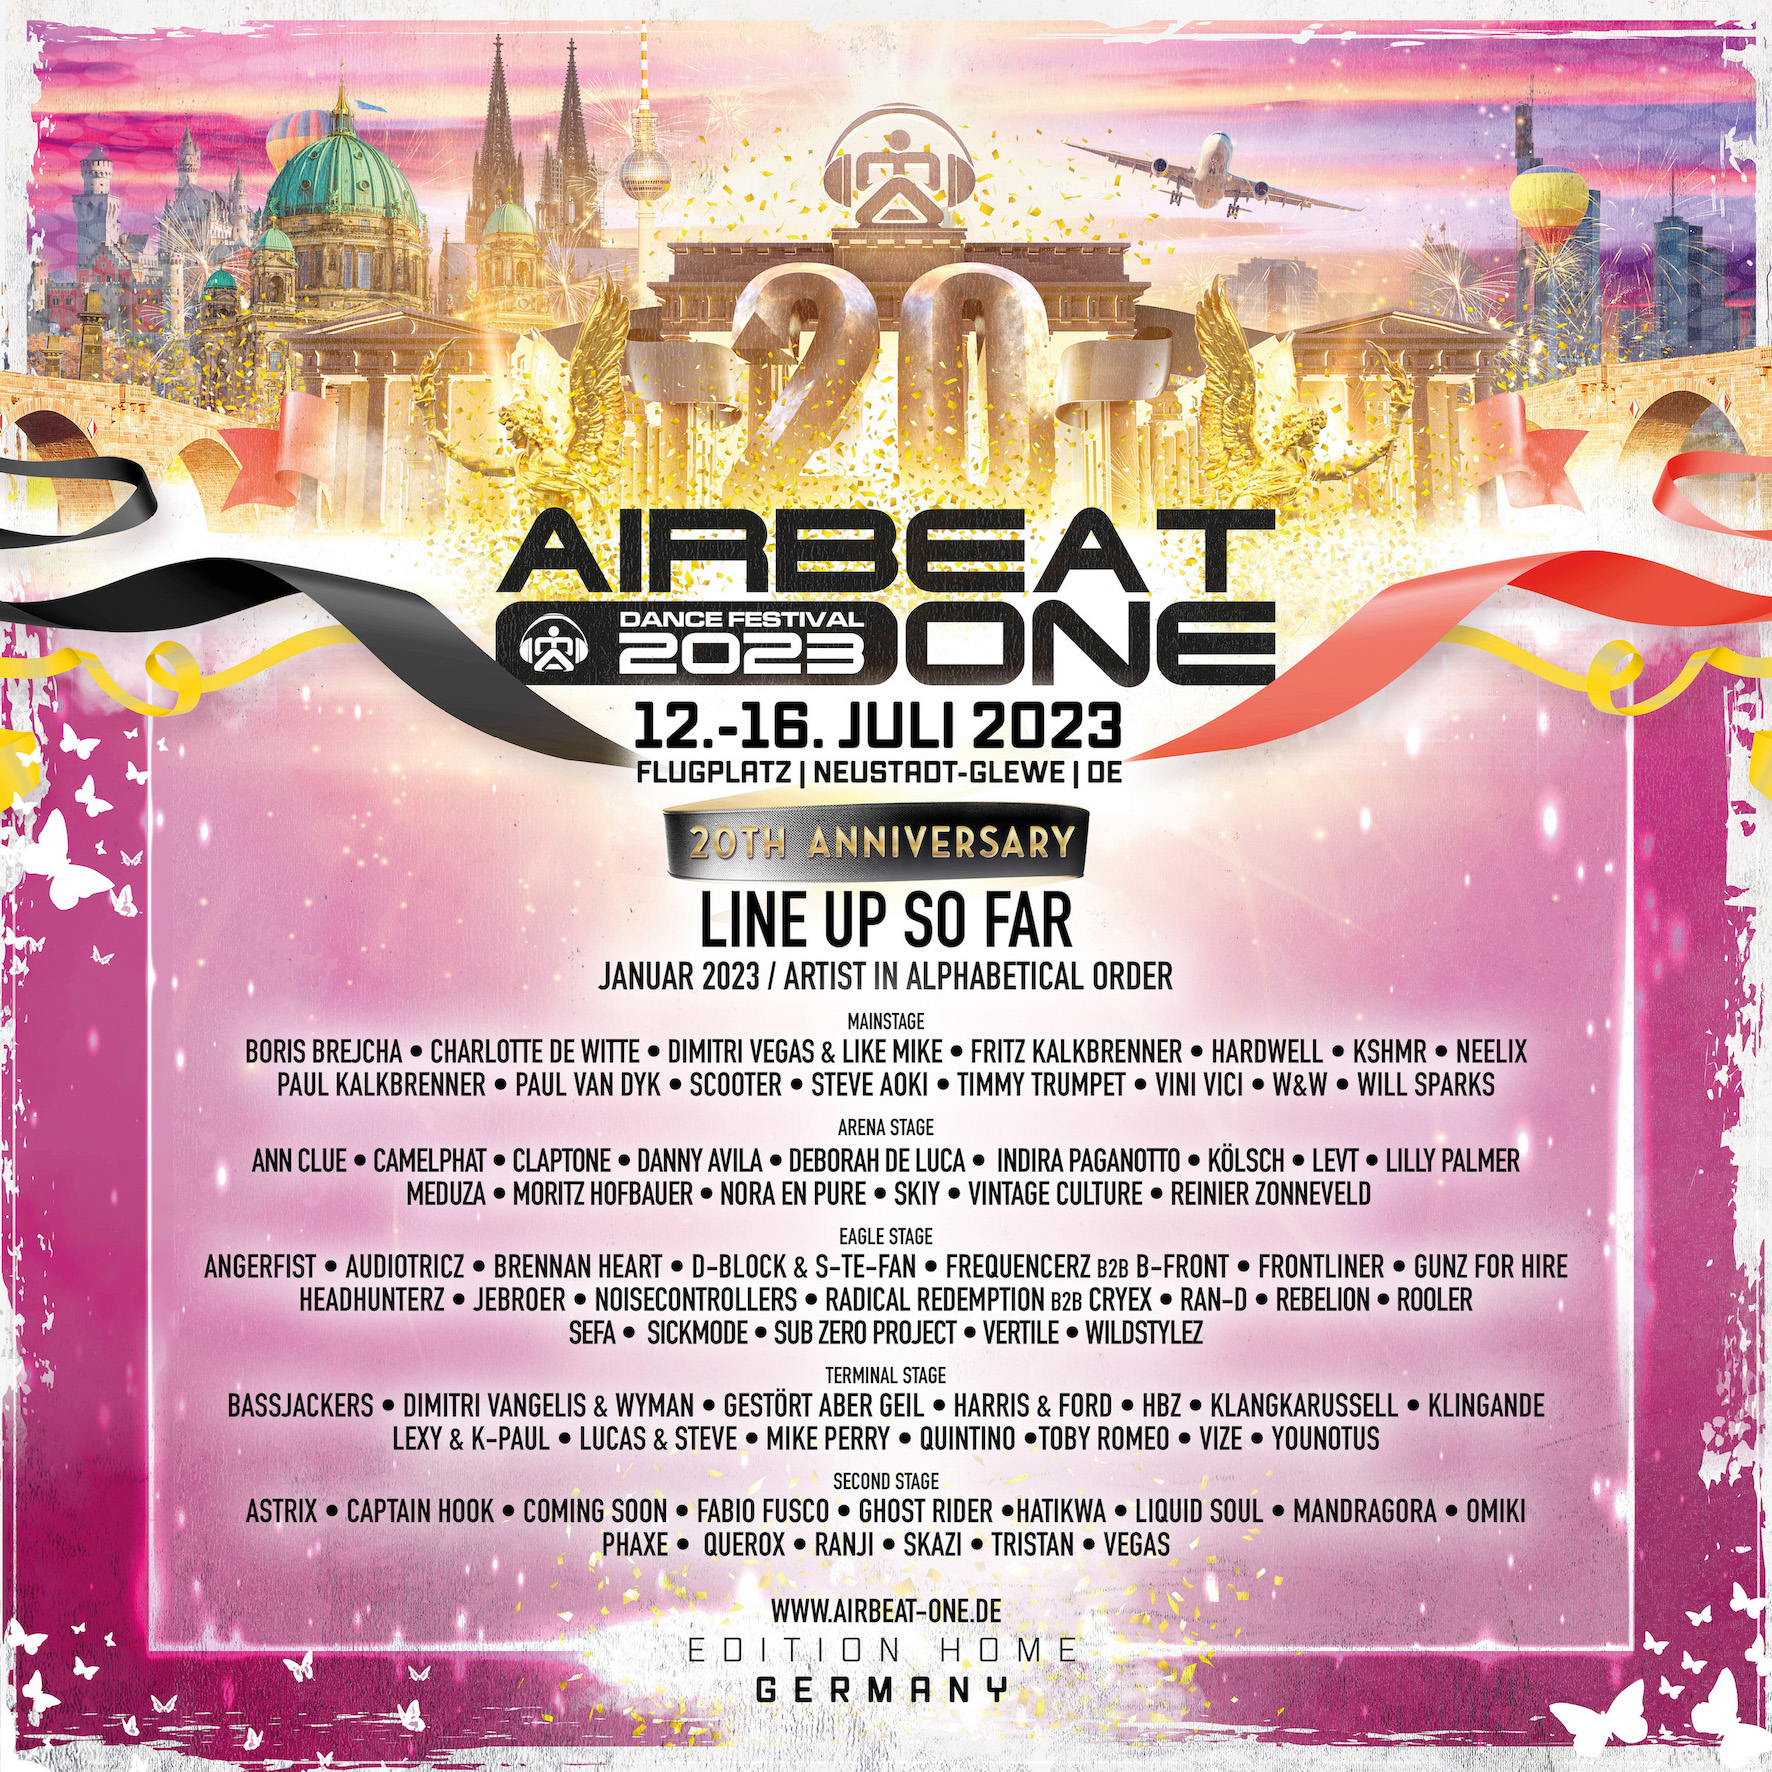 AIRBEAT ONE Festival presents more stars for 2023